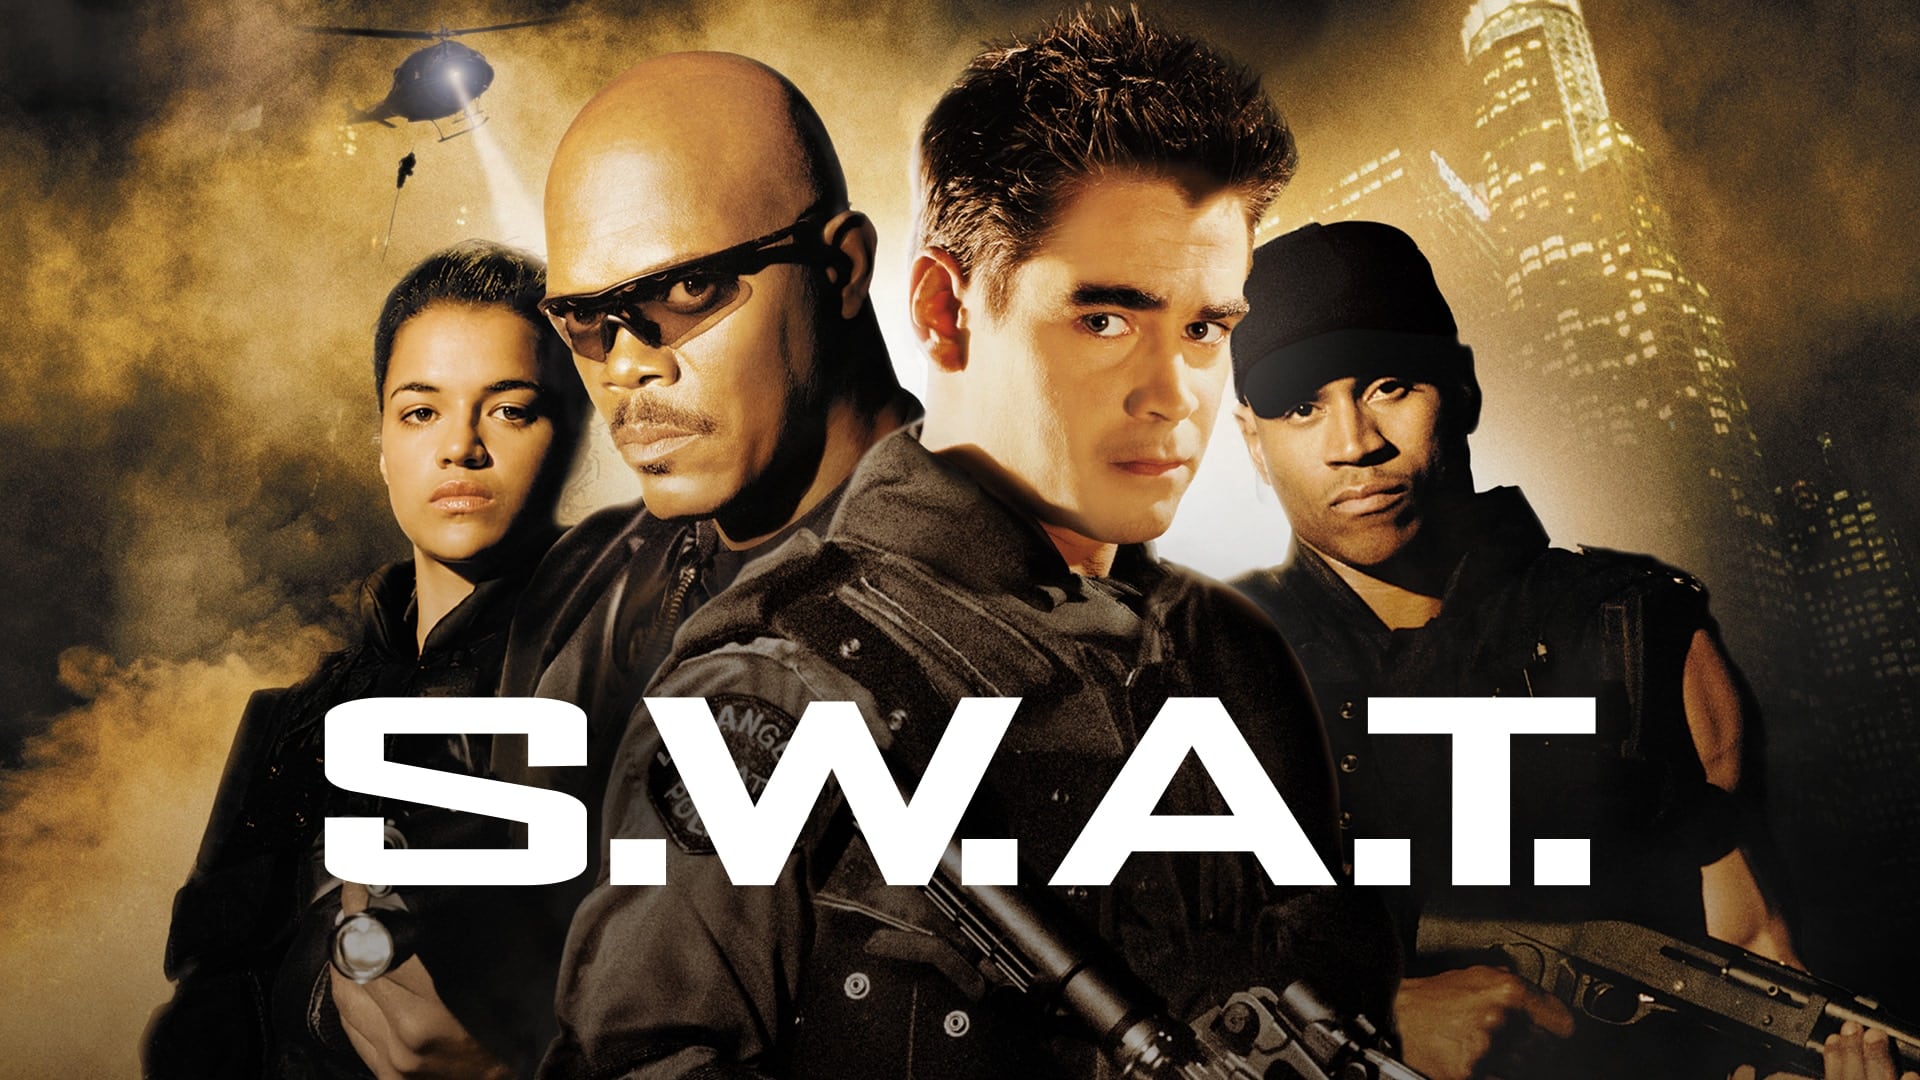 Watch S.W.A.T. Online | Stream Full Movies